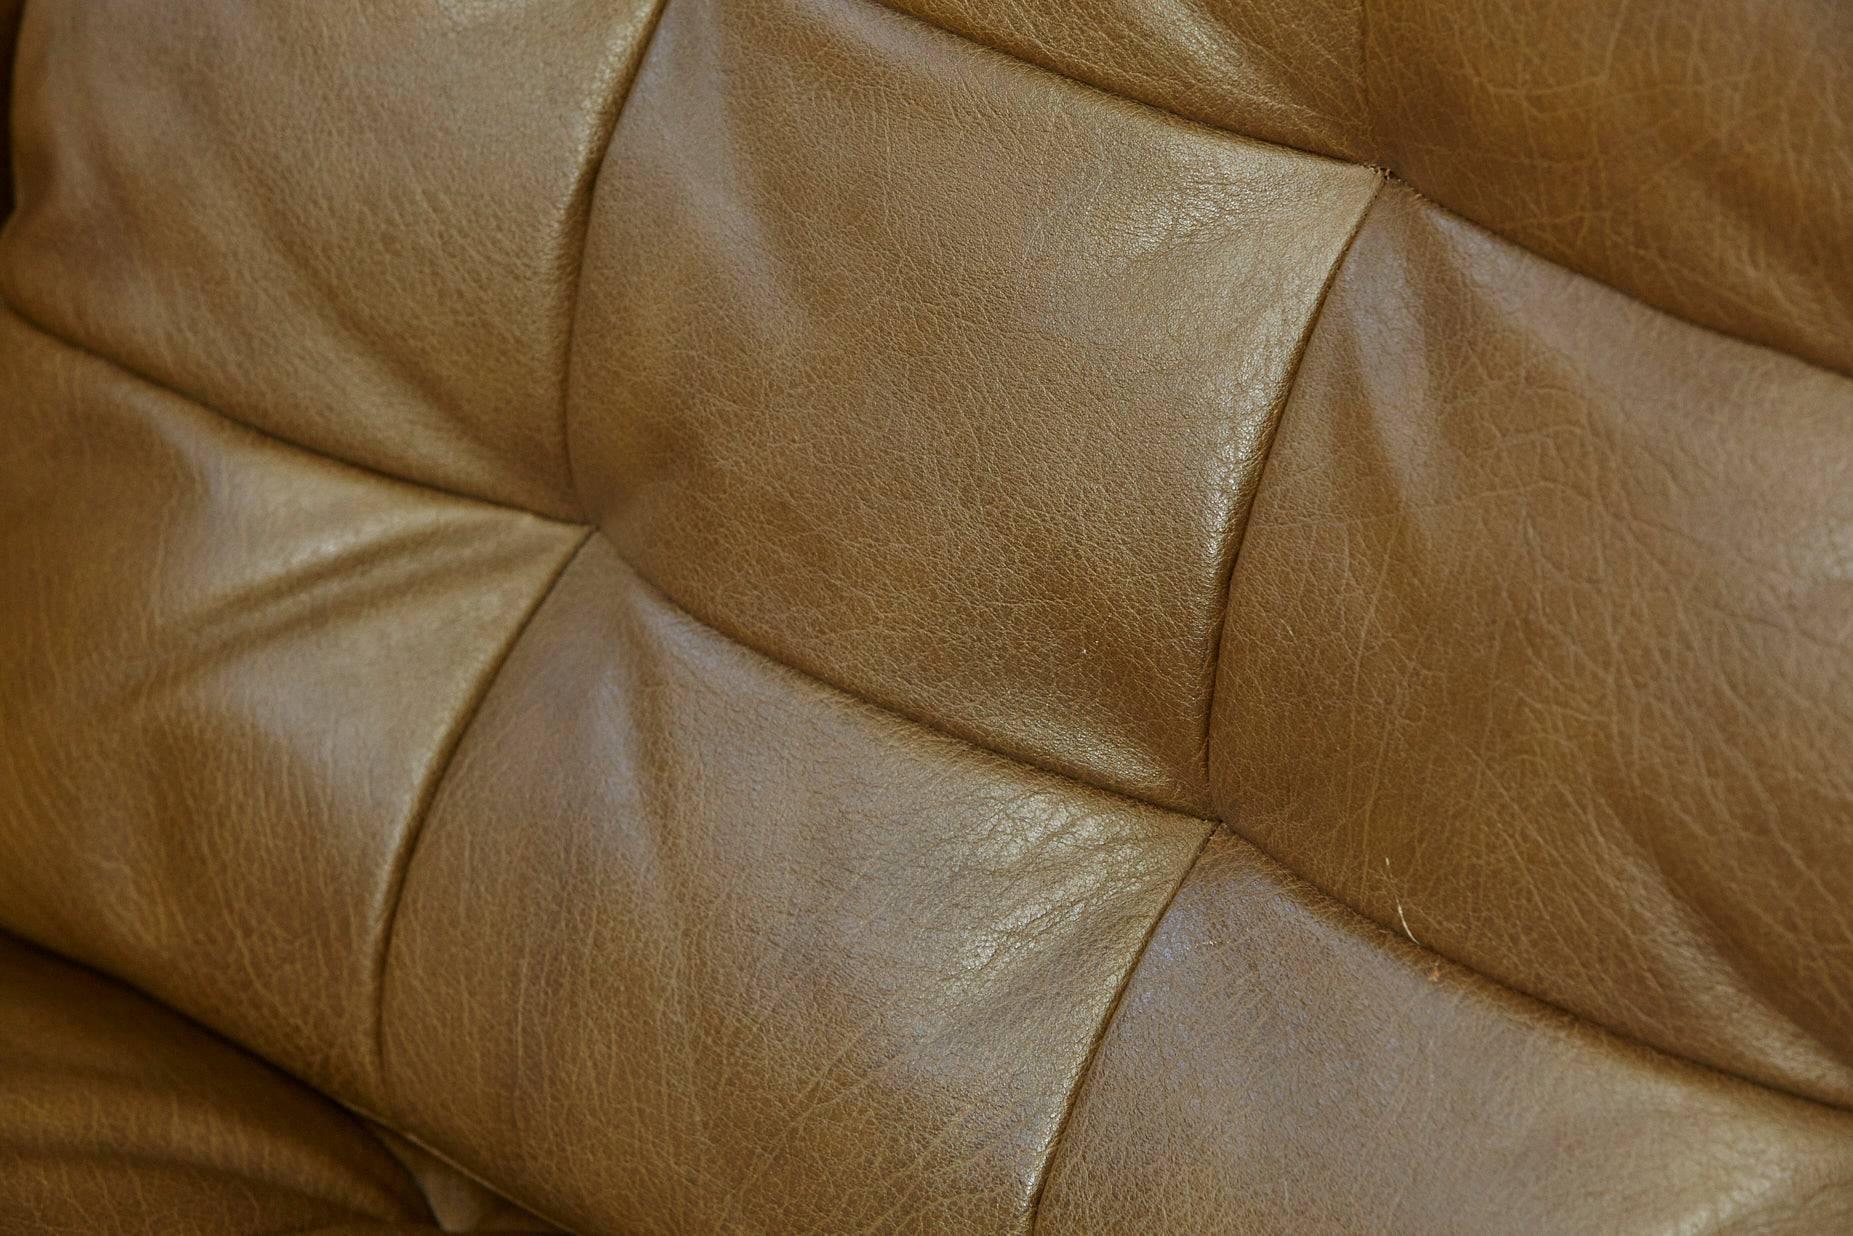 Plated Florence Knoll Tan Leather Button Tufted Lounge Chair, 1970s For Sale